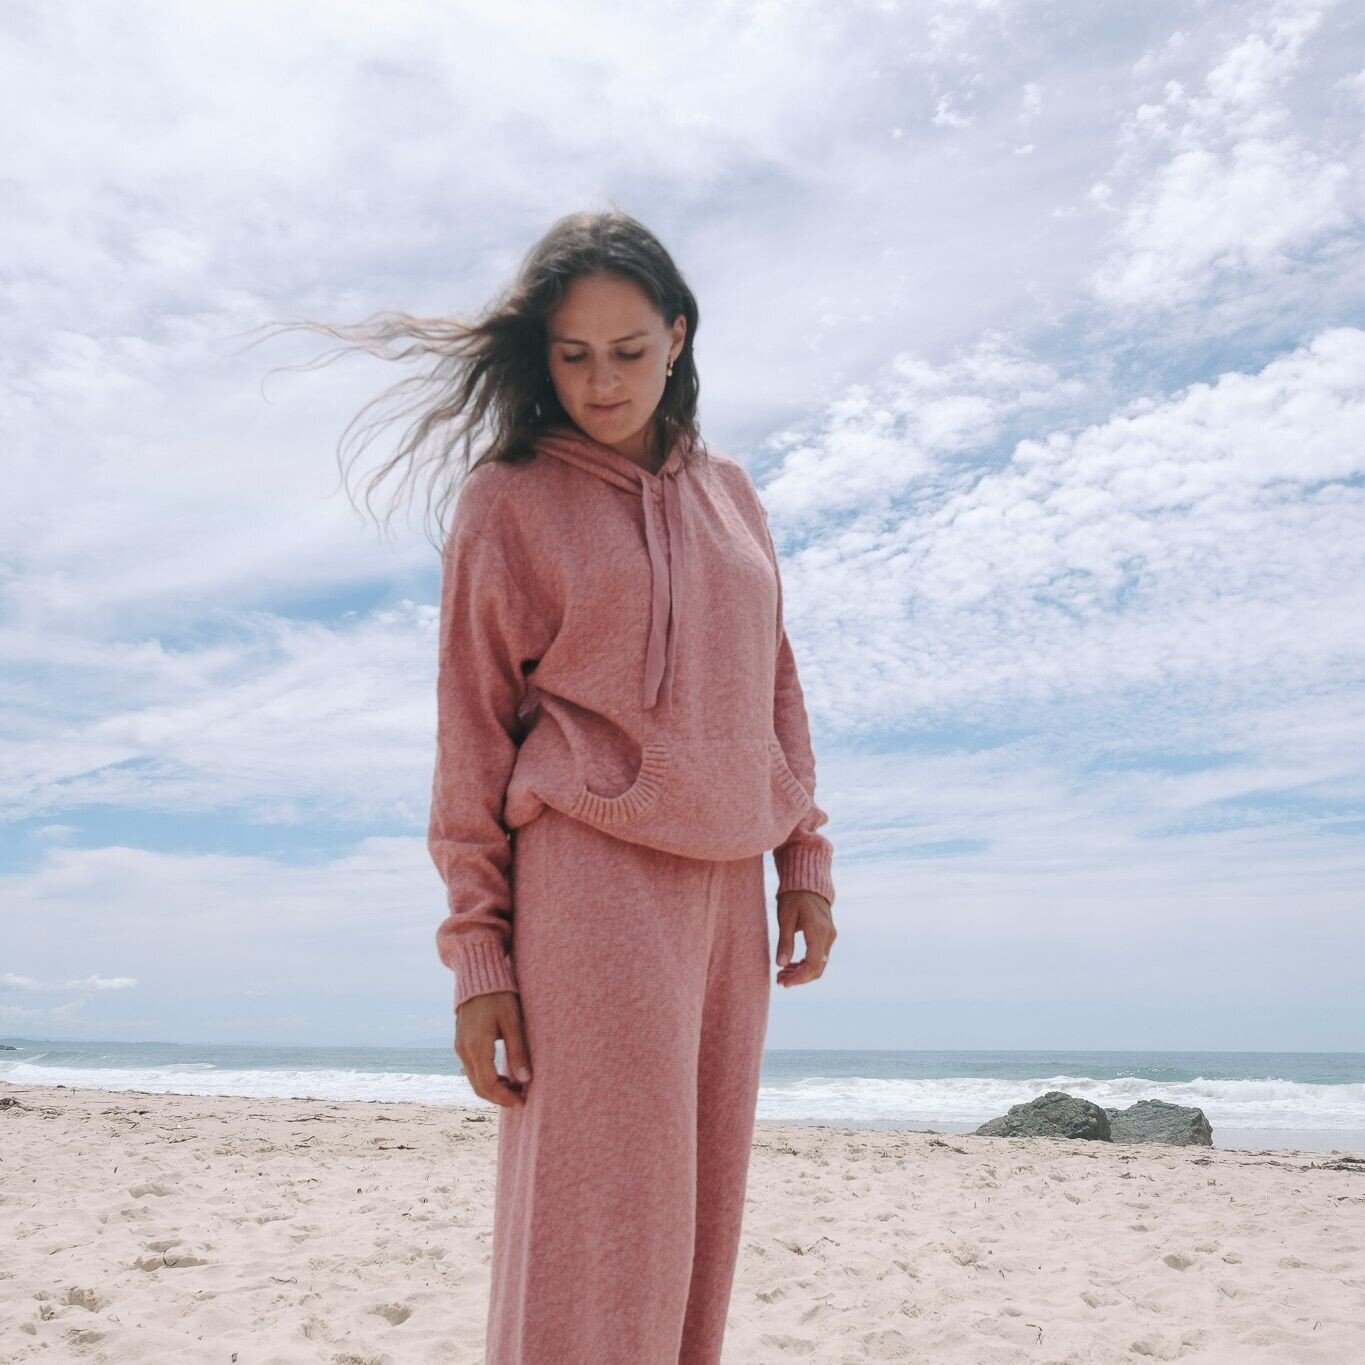 Windy beach days made cosy in a matching set. ⁠
⁠
#pipinghotaustralia #forcleanoceans